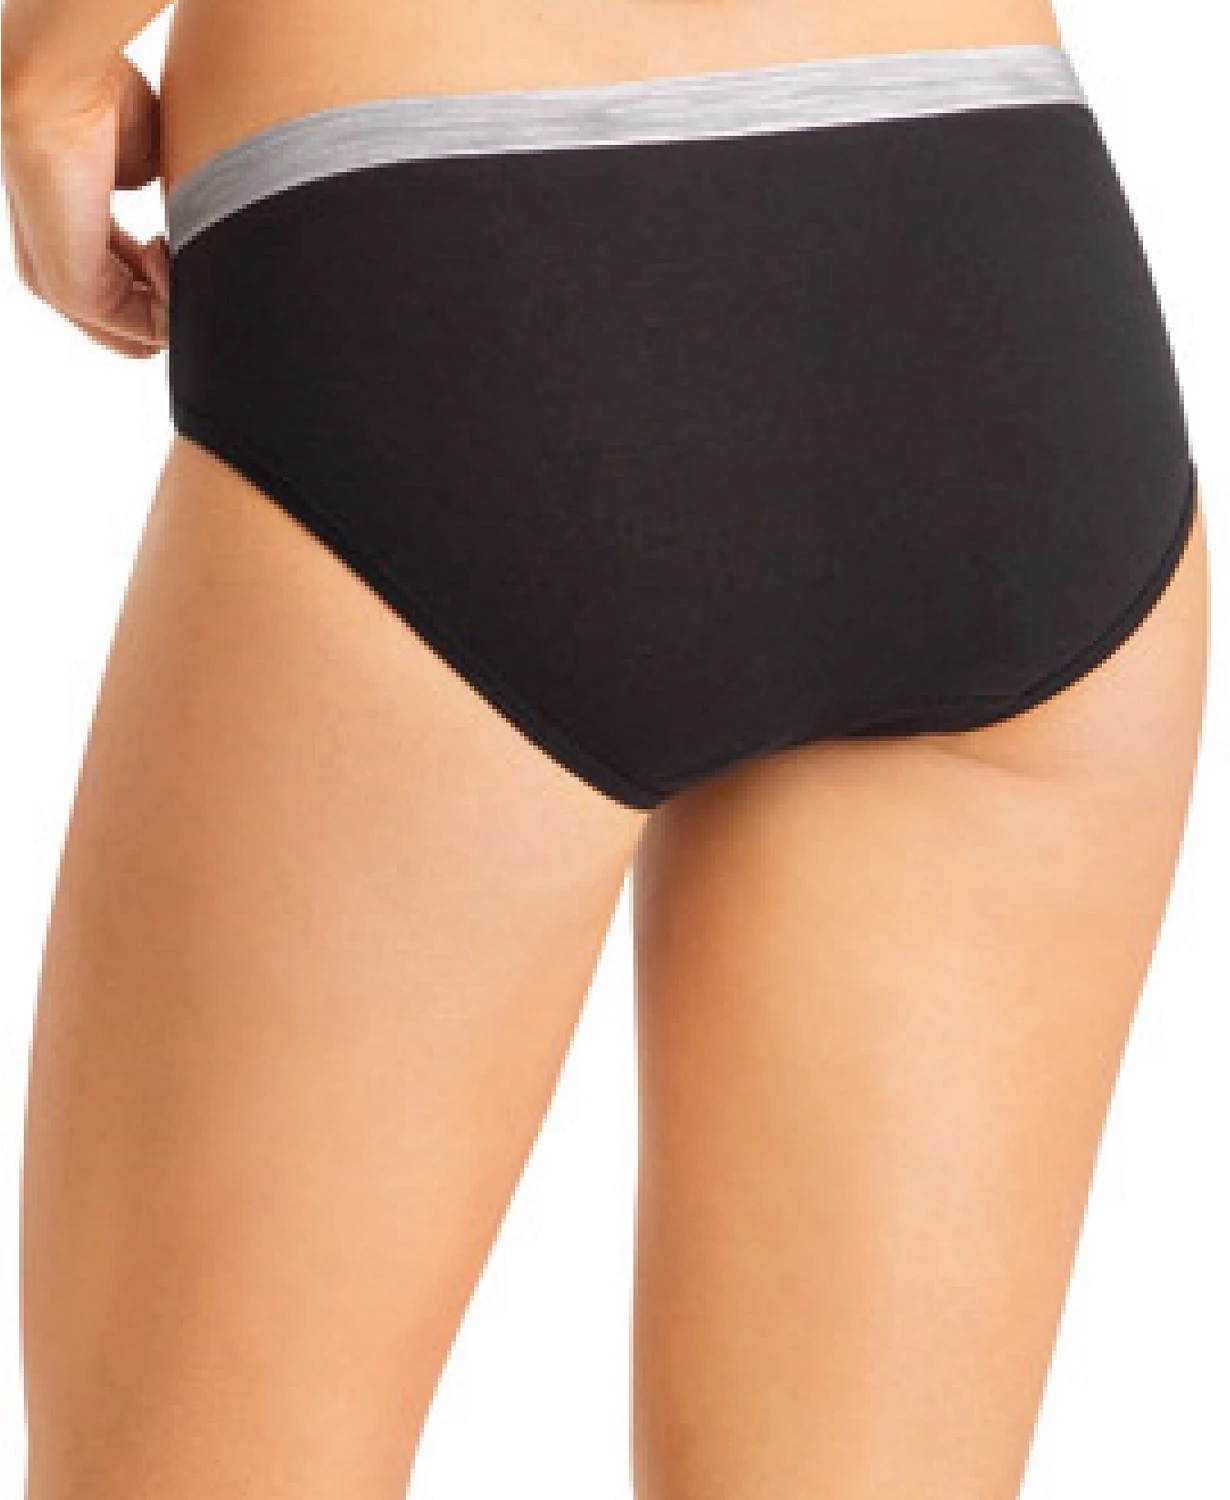 https://damidols.com/wp-content/uploads/2021/10/Hanes-Womens-6-Pk.-Cotton-Sporty-Hipster-Underwear-With-Cool-Comfort-1.jpg